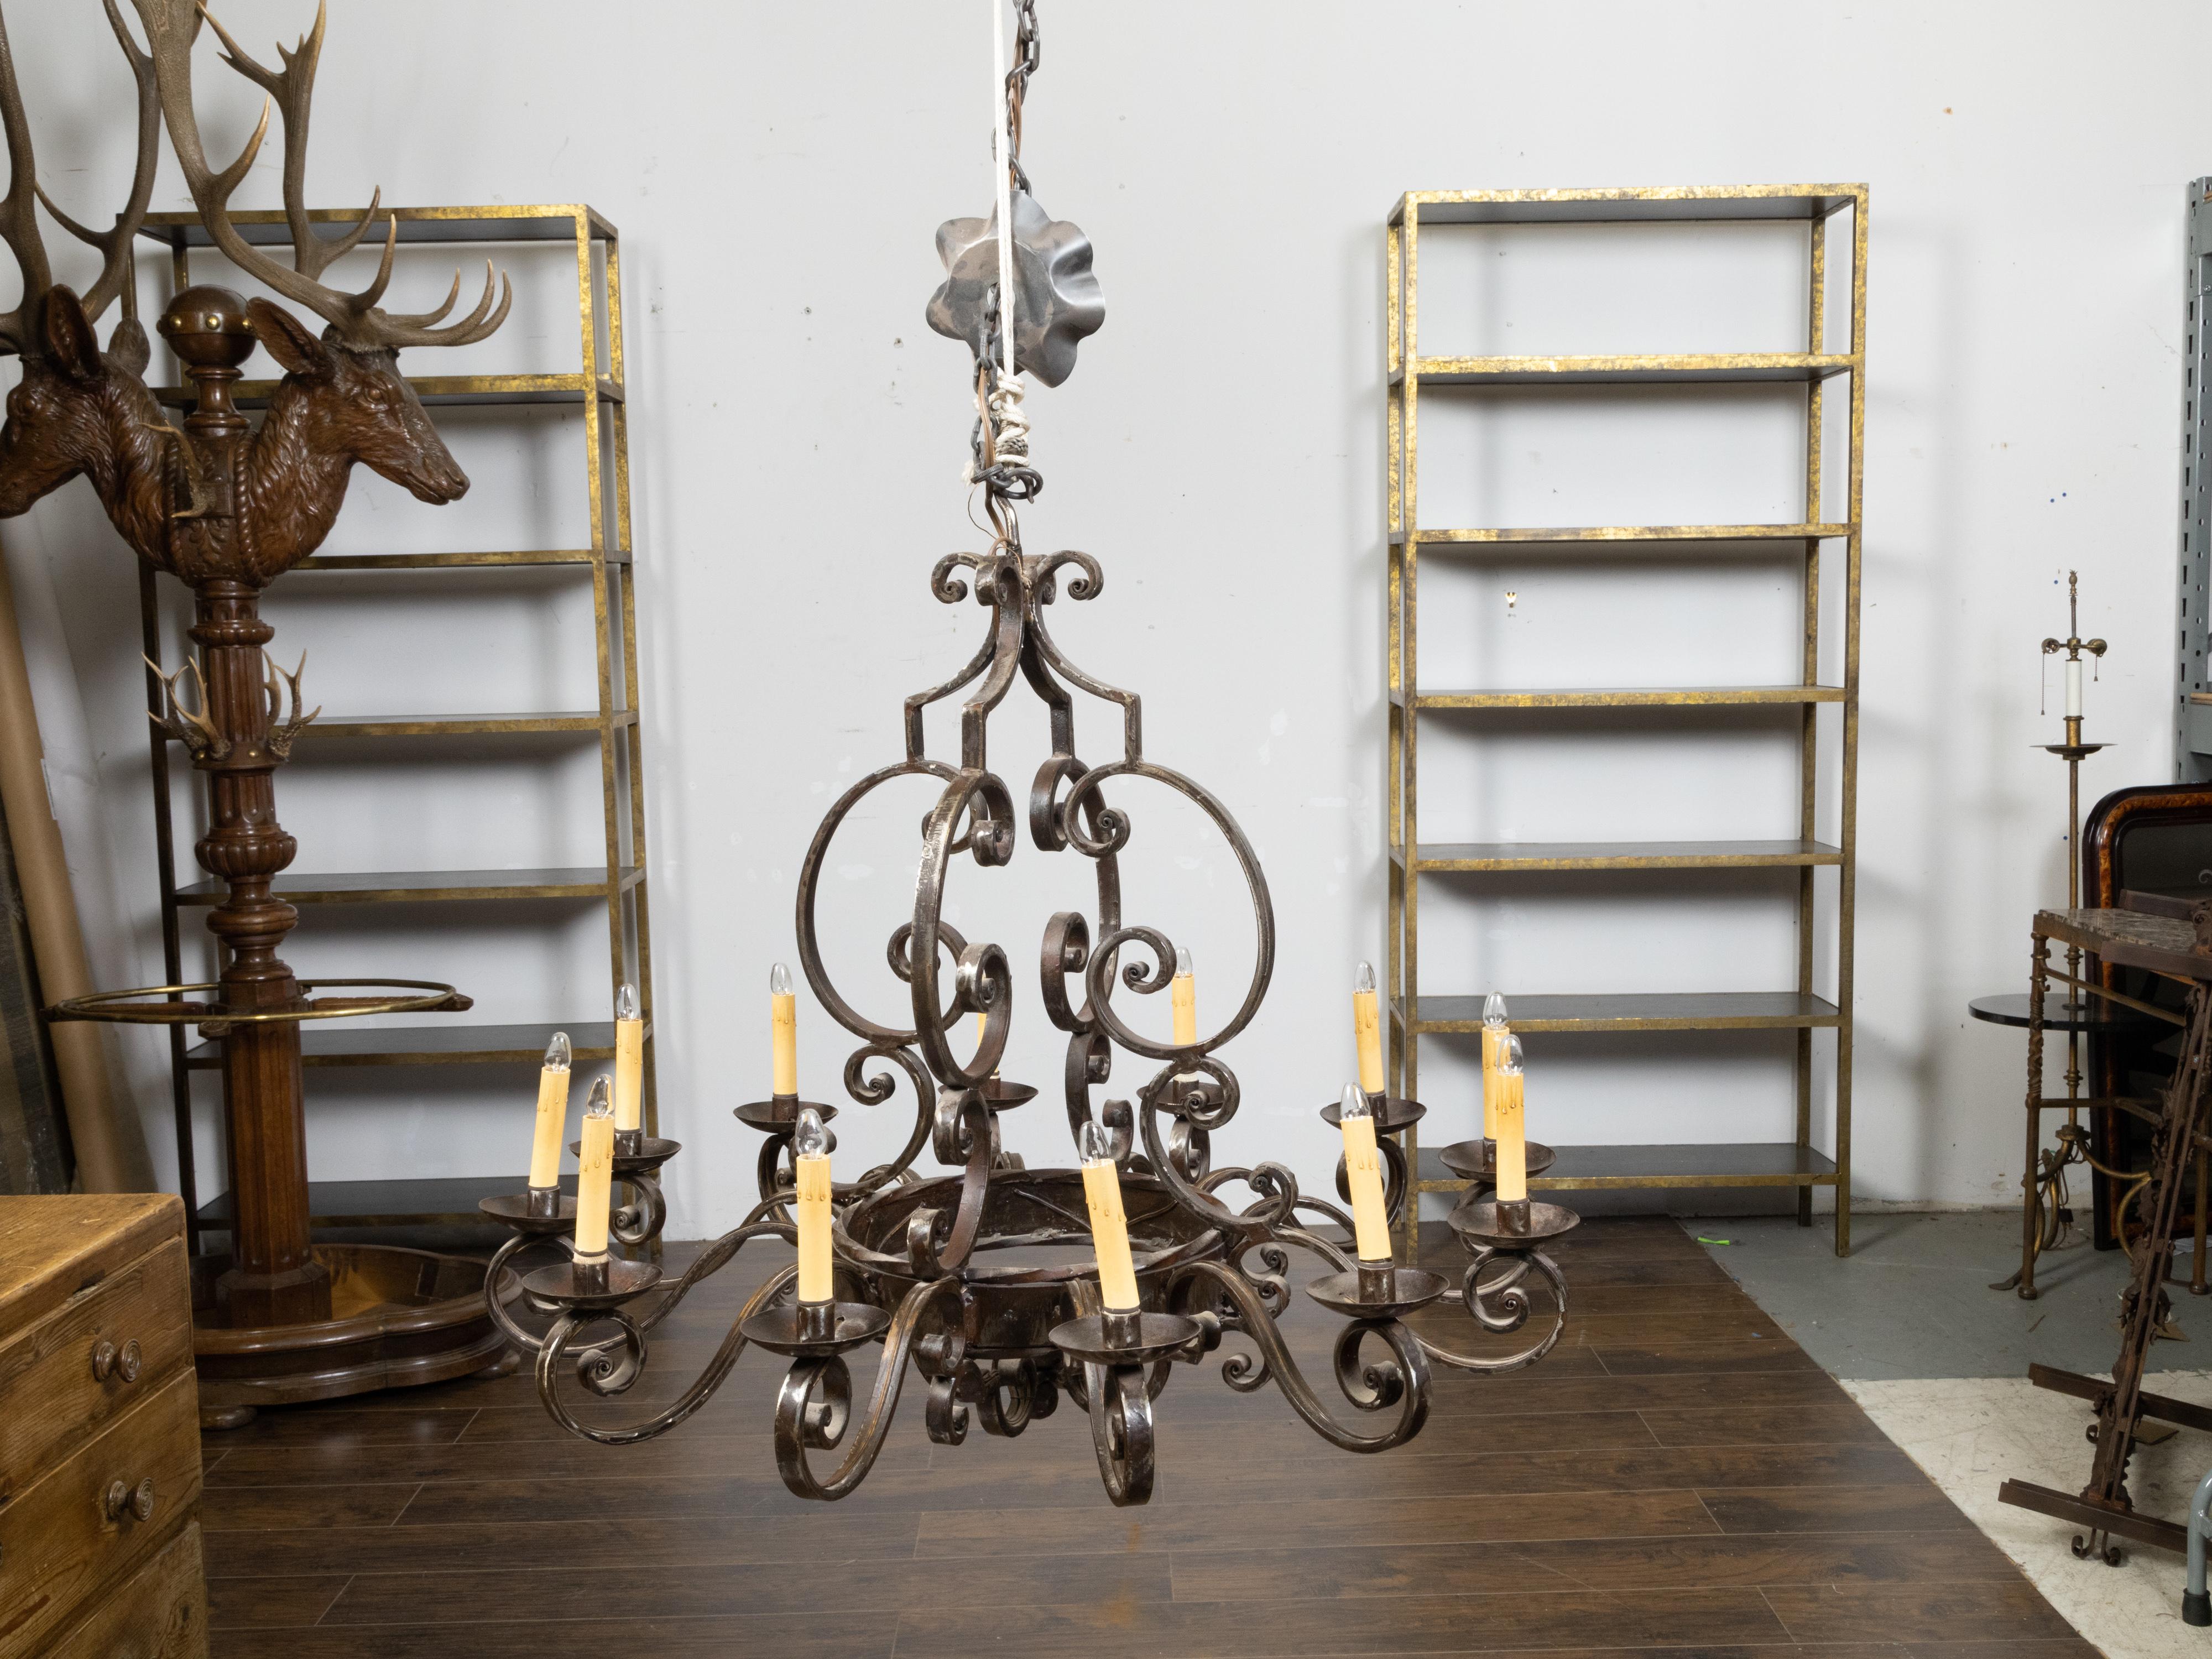 A French vintage steel chandelier from the mid 20th century, with 12 lights, C-scrolls, S-scrolls and dark patina. Created in France during the Midcentury period, this steel chandelier captures our attention with its nice proportions and sinuous